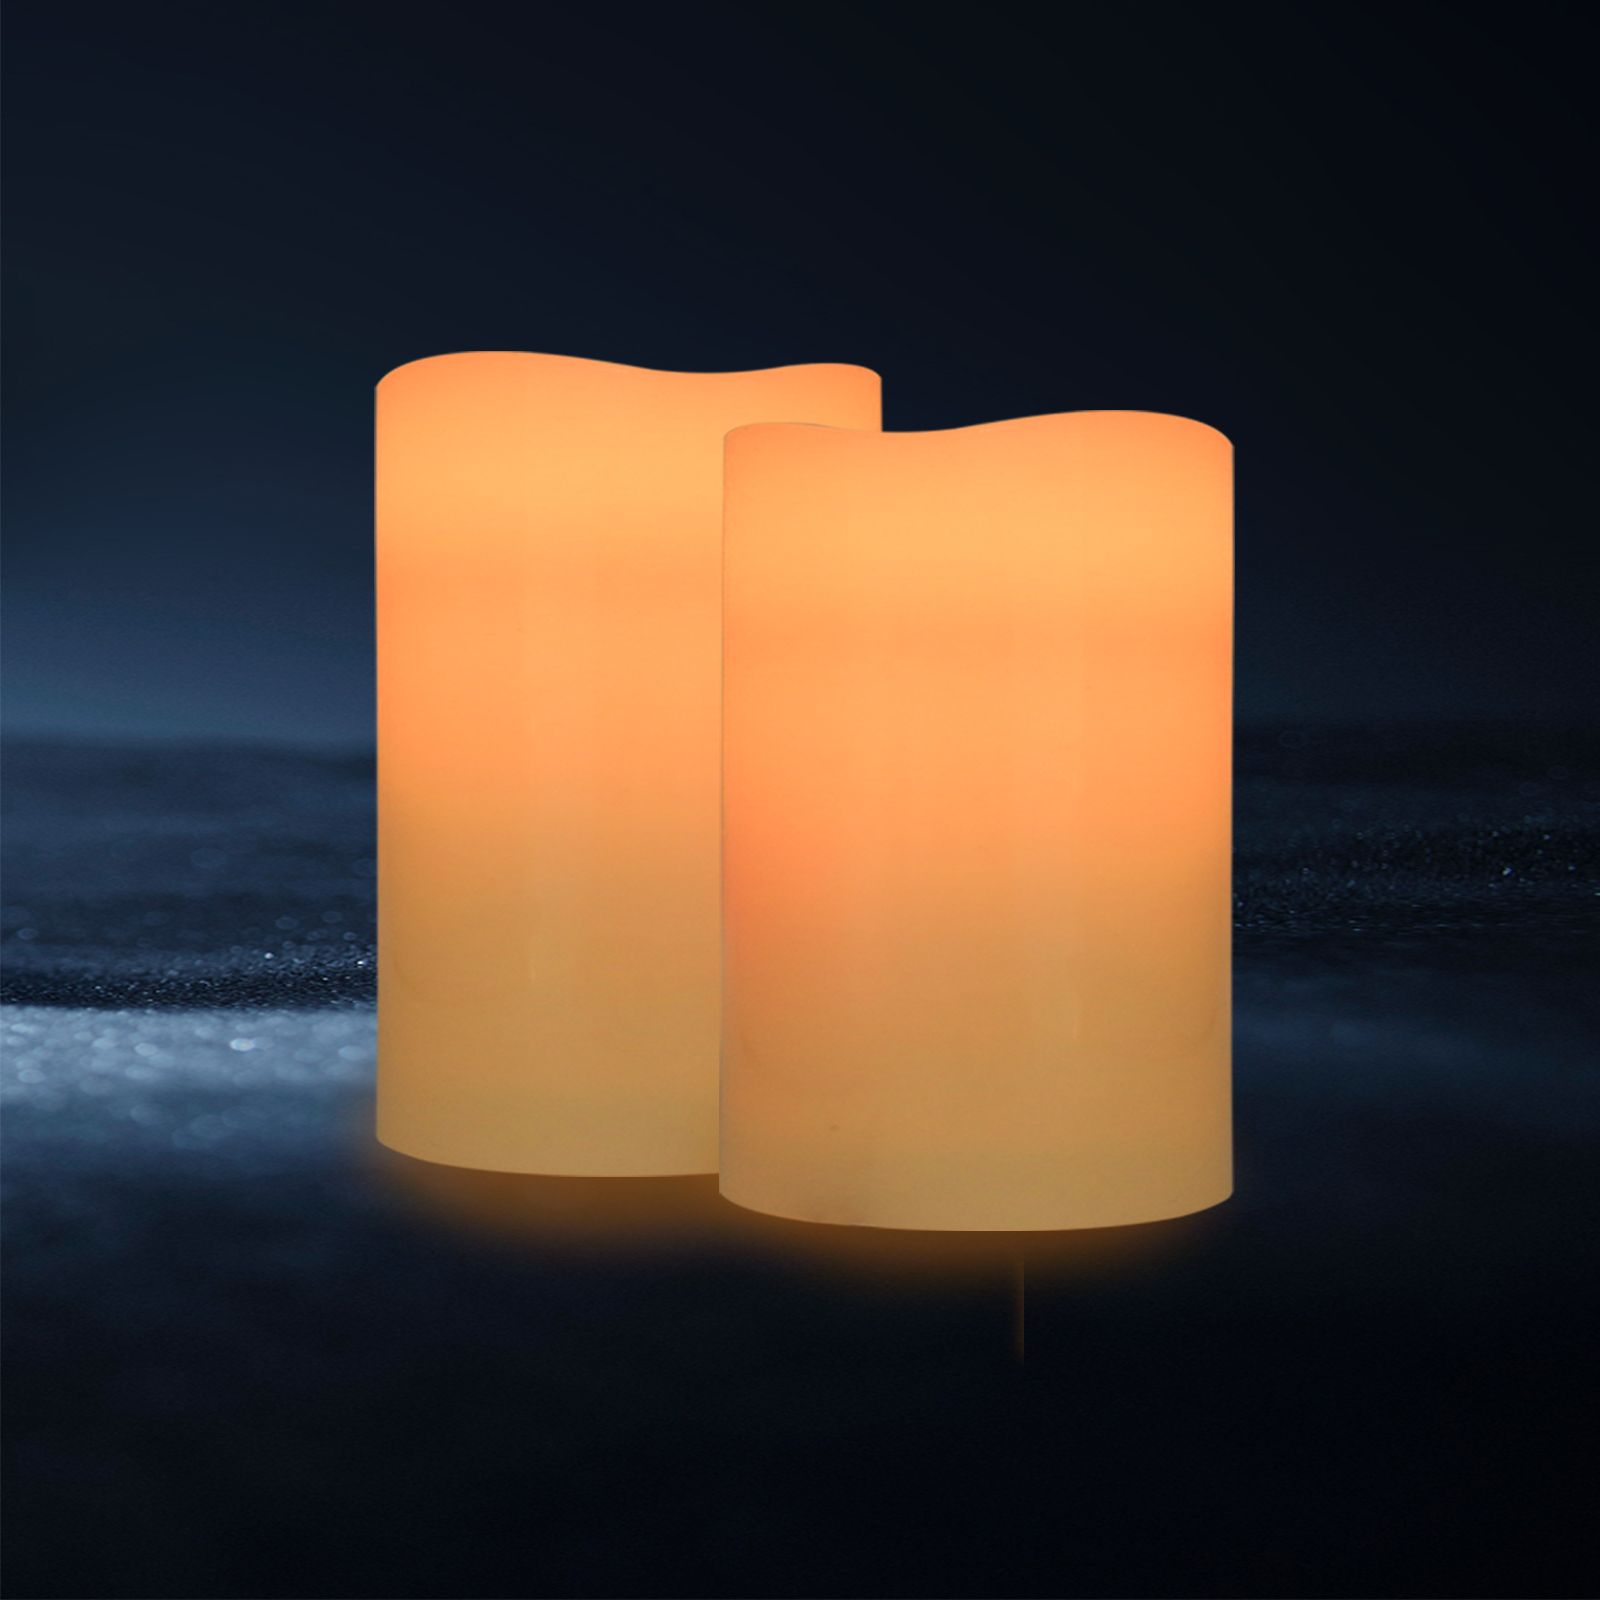 2 Candles With Audio